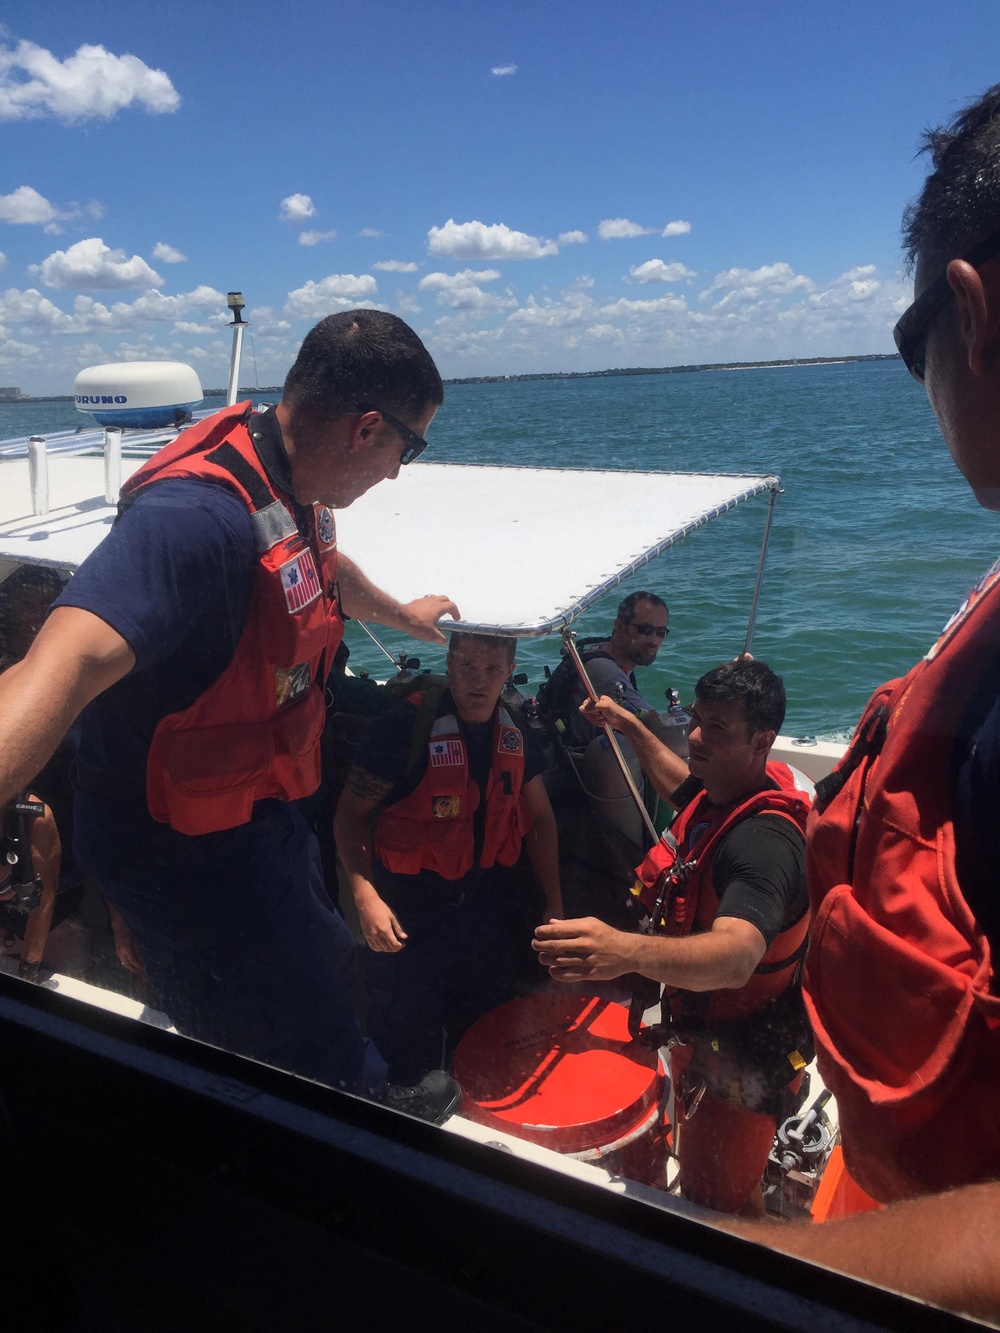 Coast Guard rescues 8 after charter dive boat takes on water